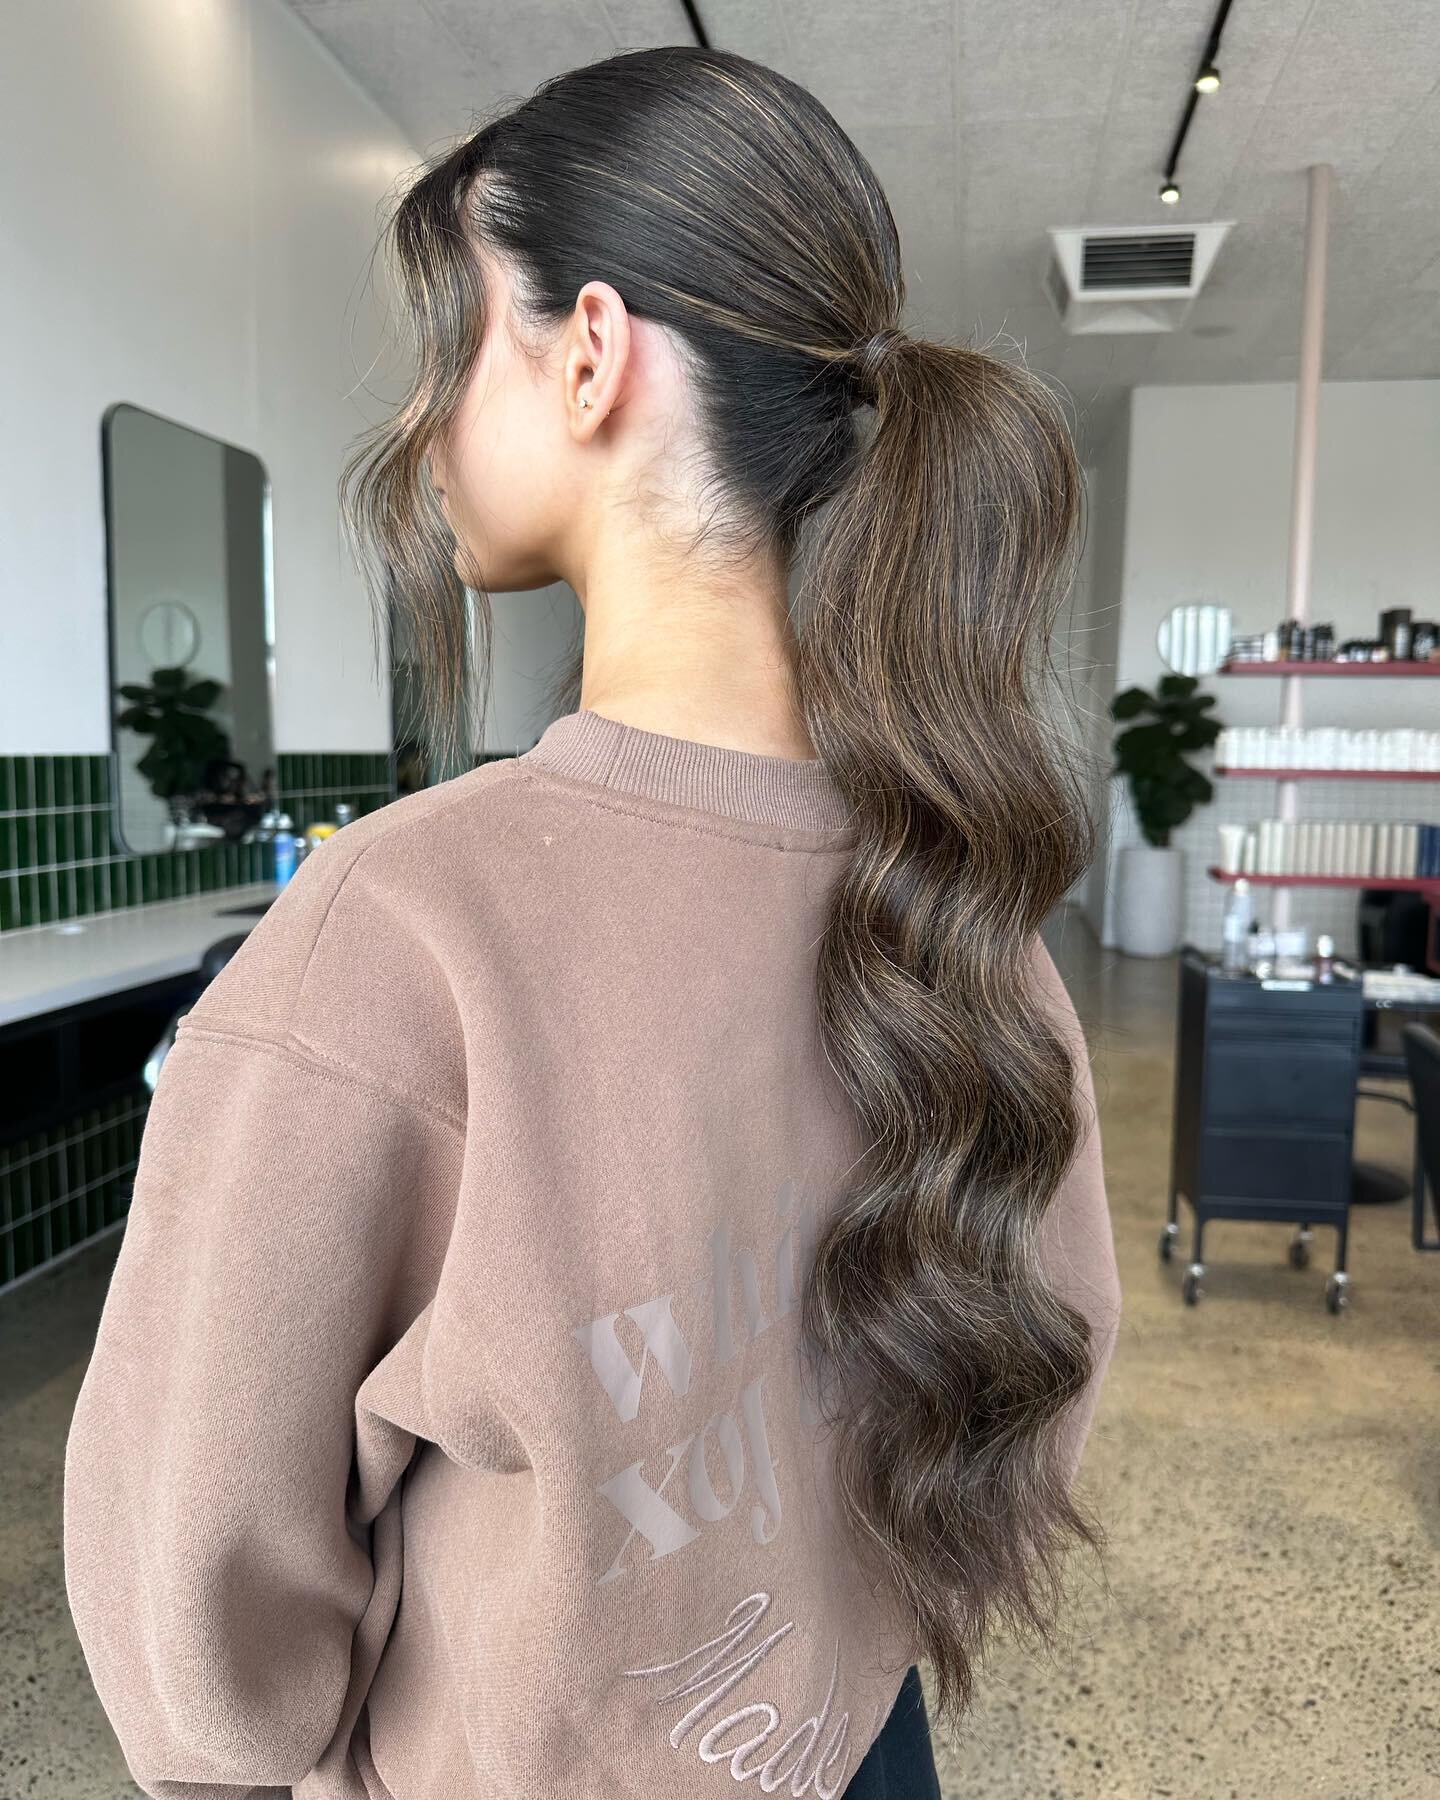 HAIR ENVY with this gorgeous sleek pony ✨🤍

STYLED W// @hottoolsproau @davroe